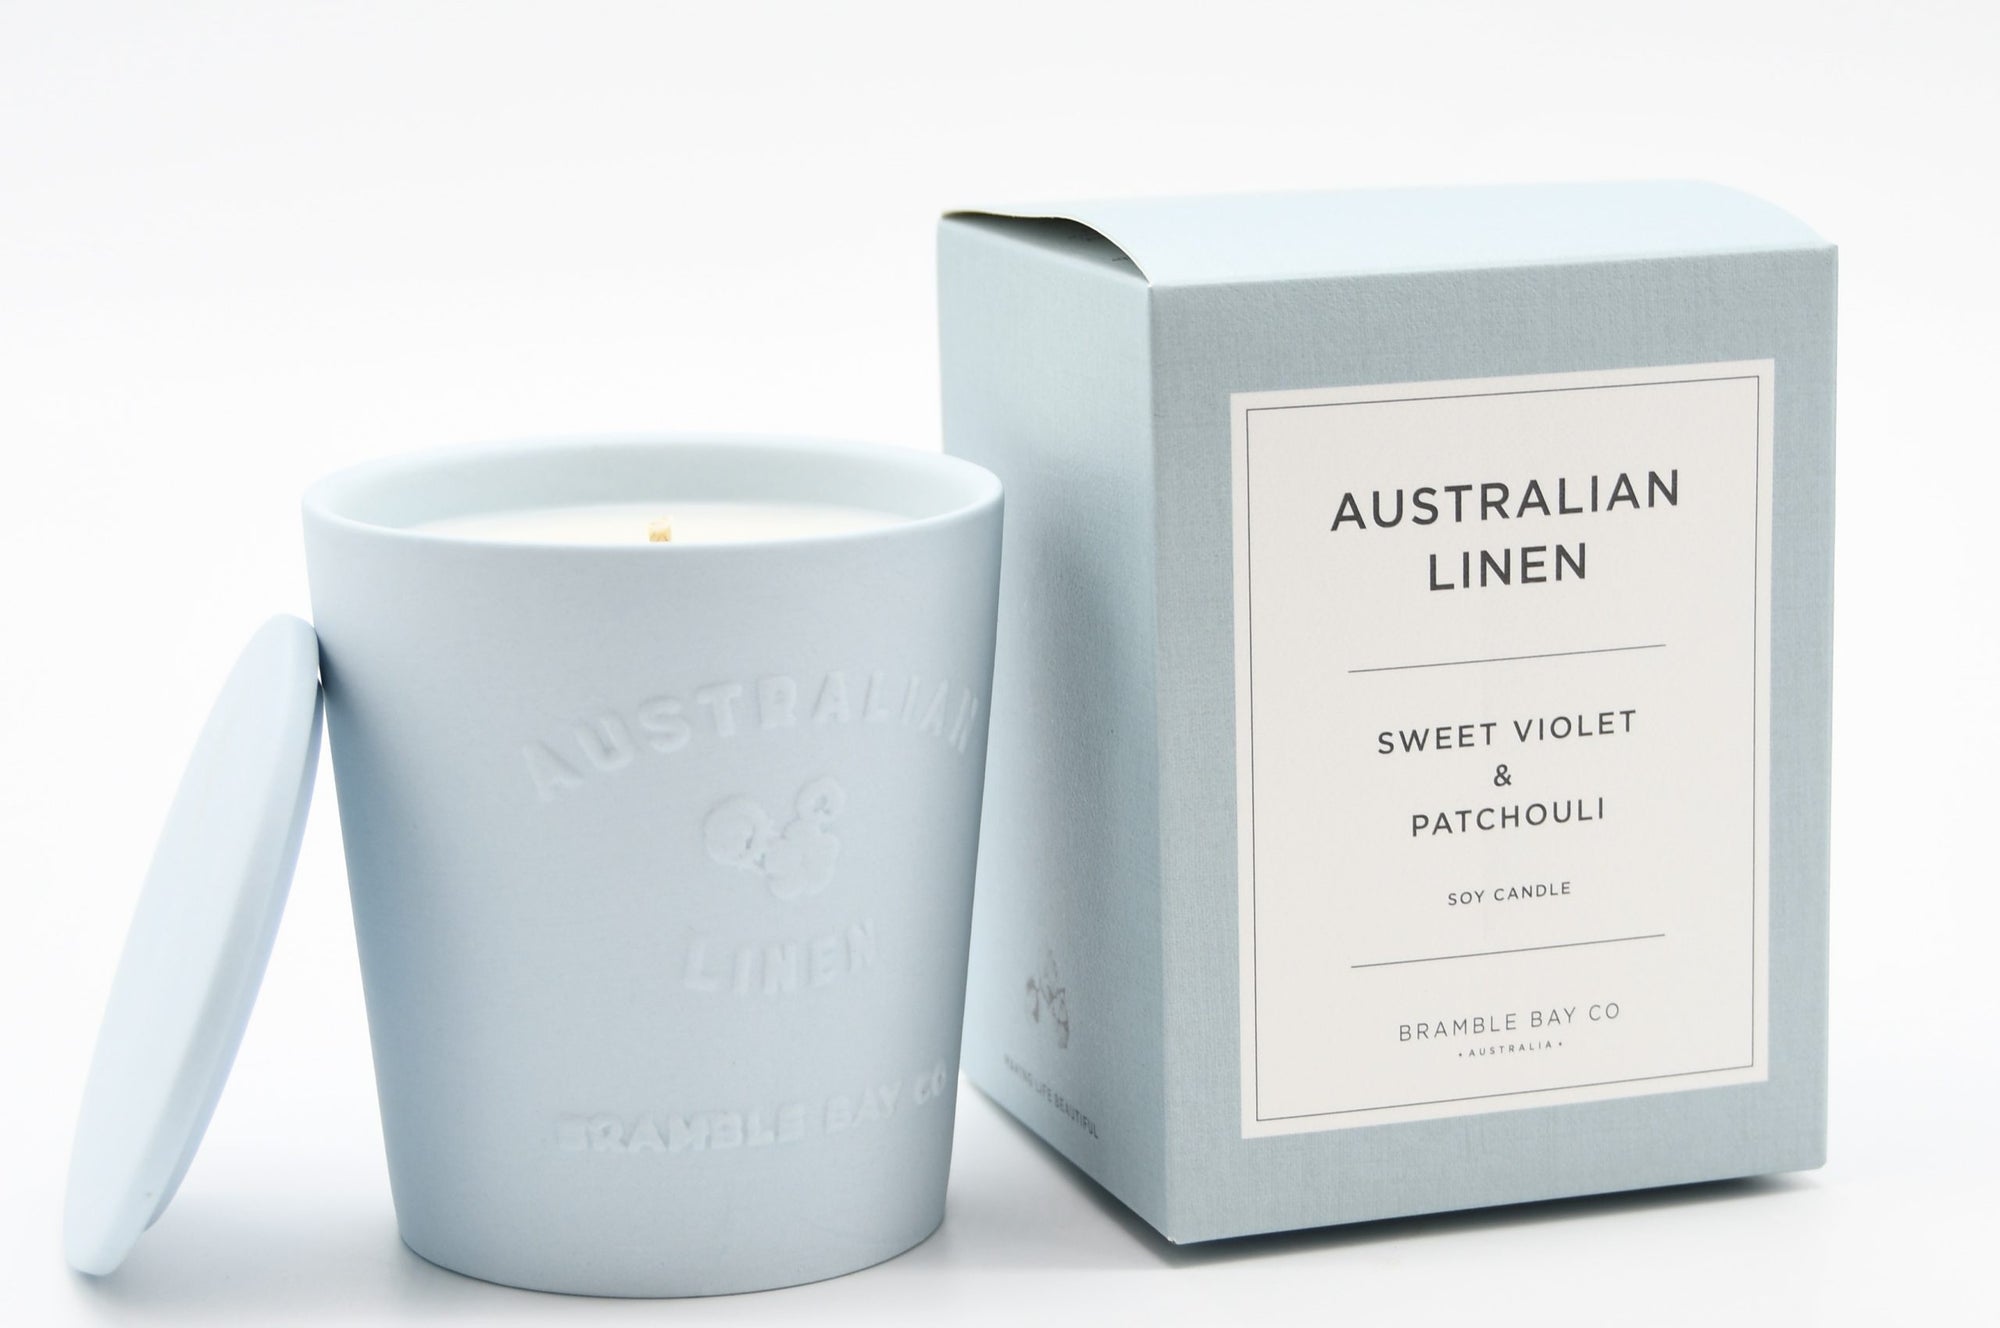 Bramble Bay Co Candle Australian Linen 300g Sweet Violet and Patchouli